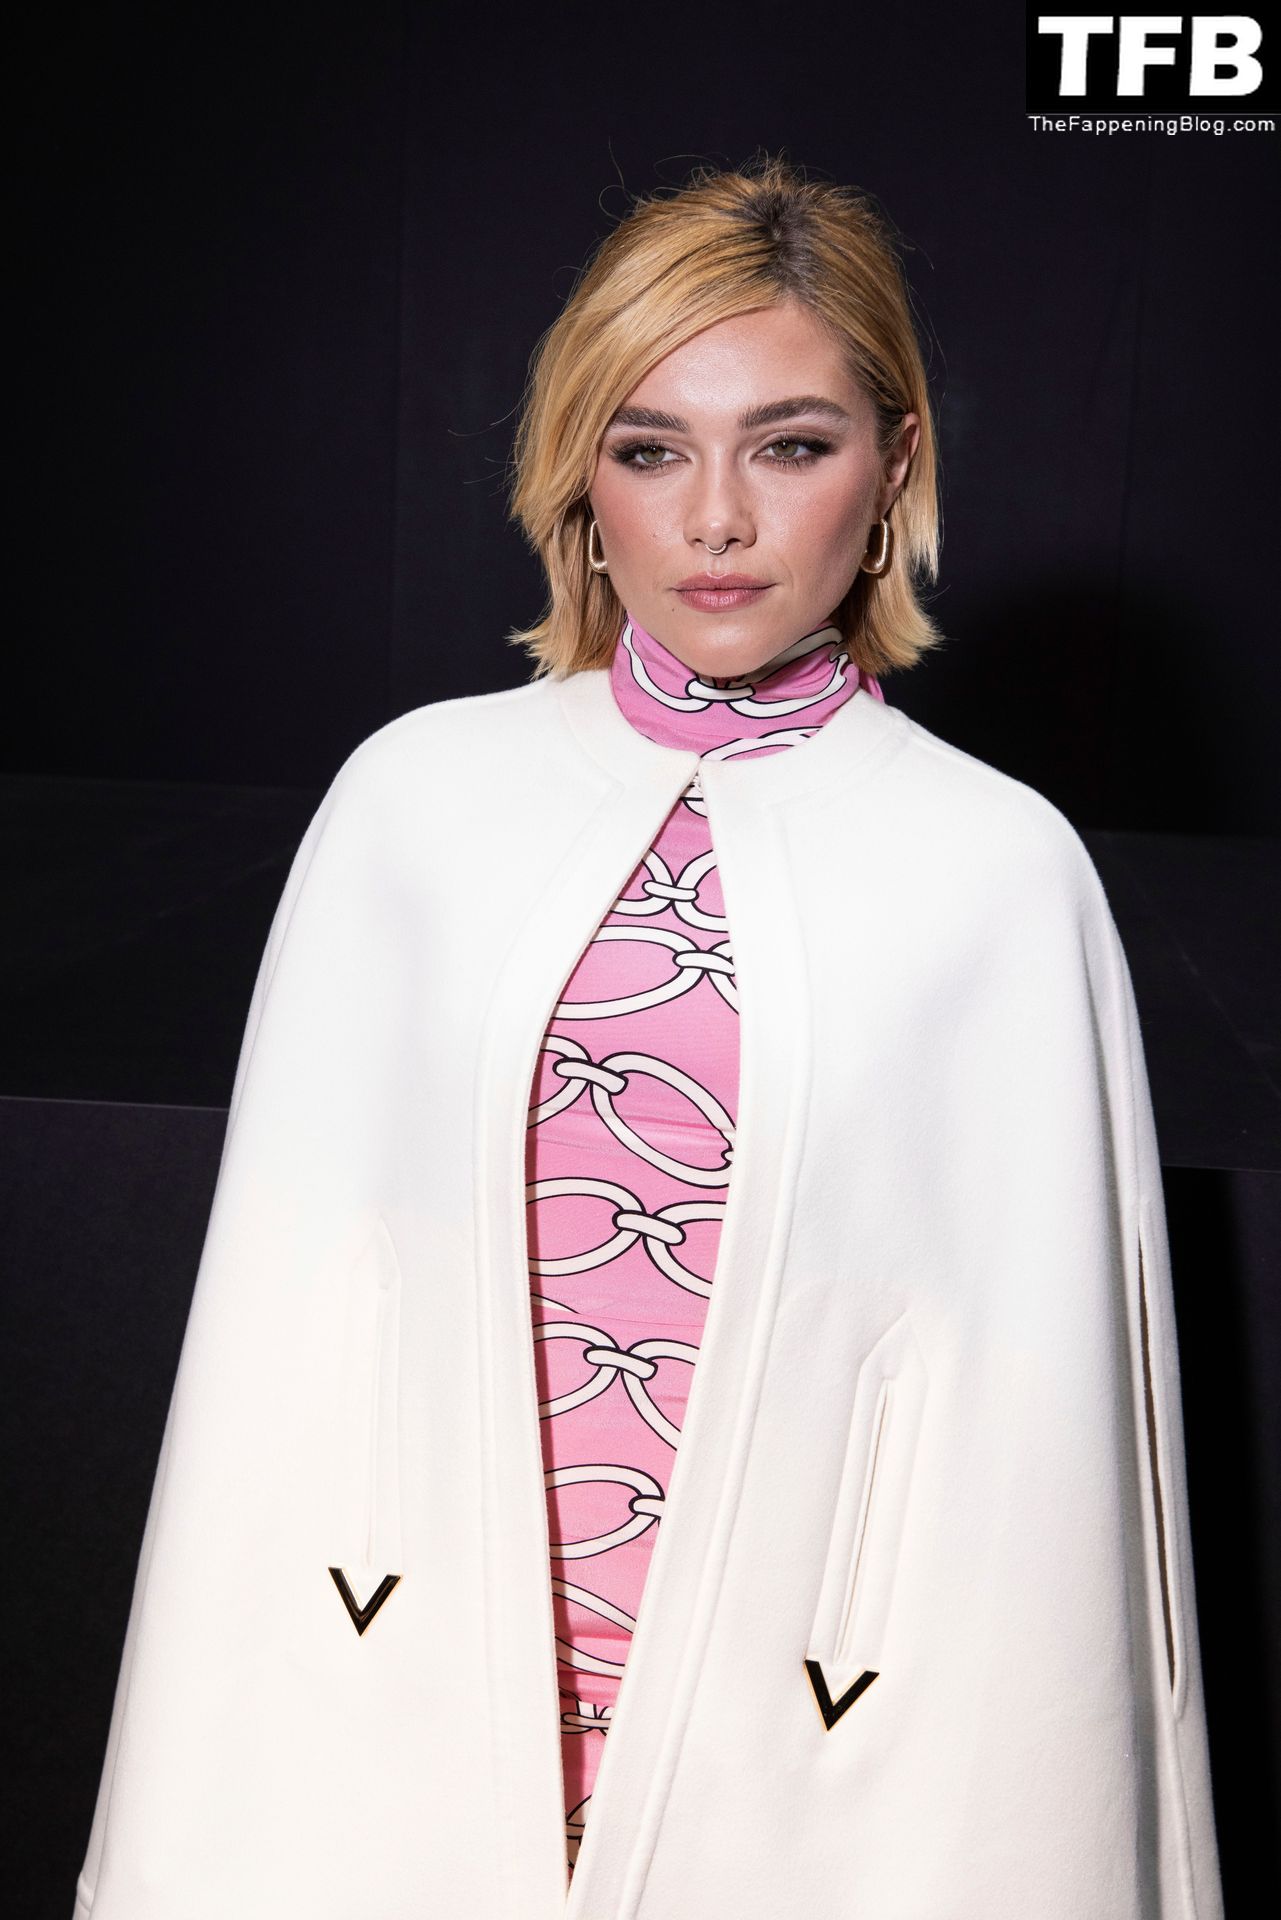 Florence-Pugh-Sexy-The-Fappening-Blog-60.jpg